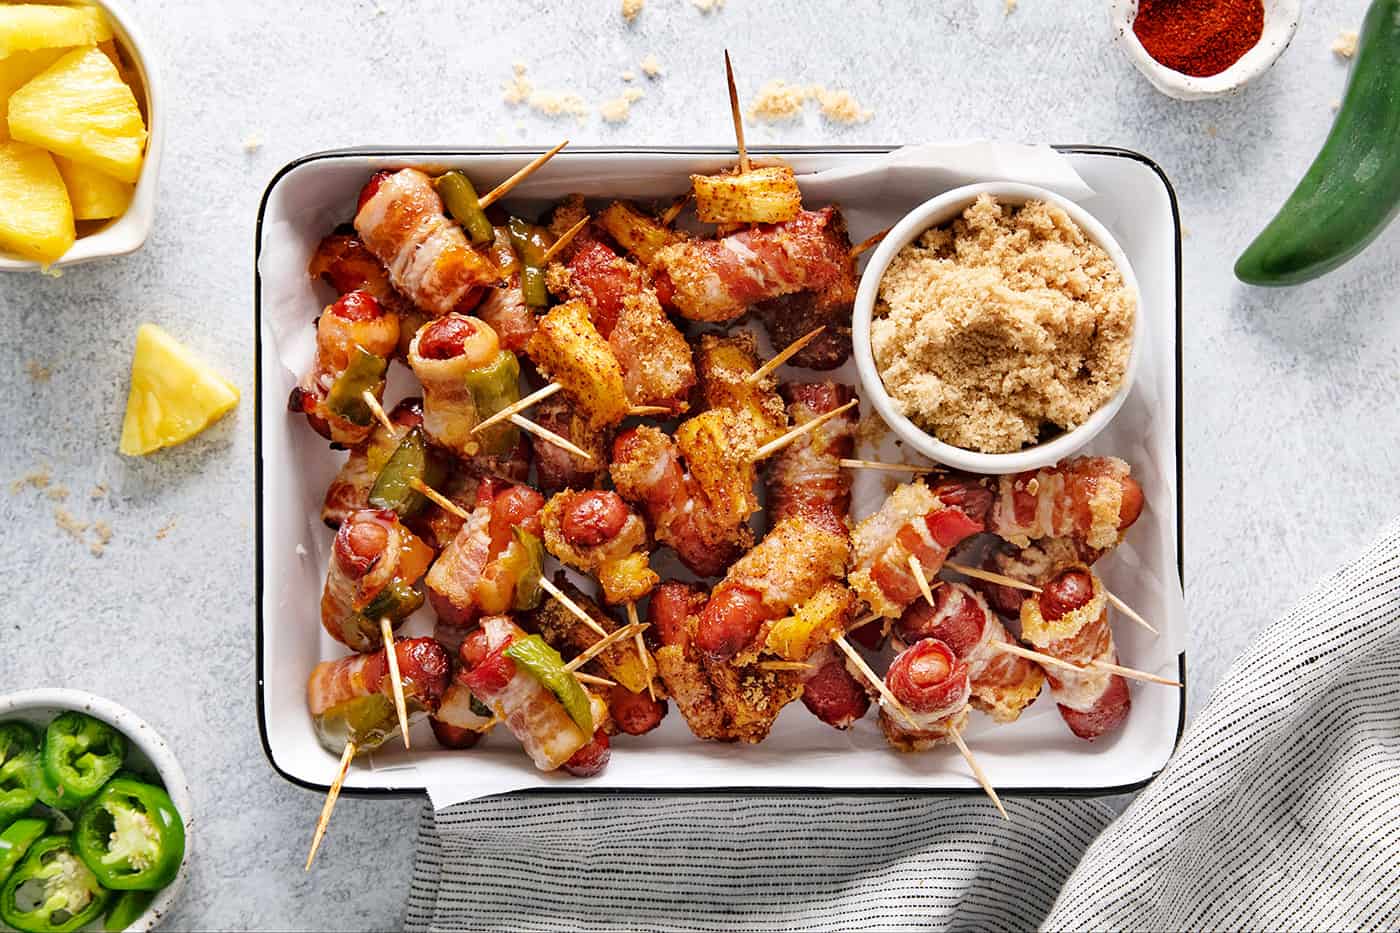 Overhead view of a tray of bacon wrapped smokies